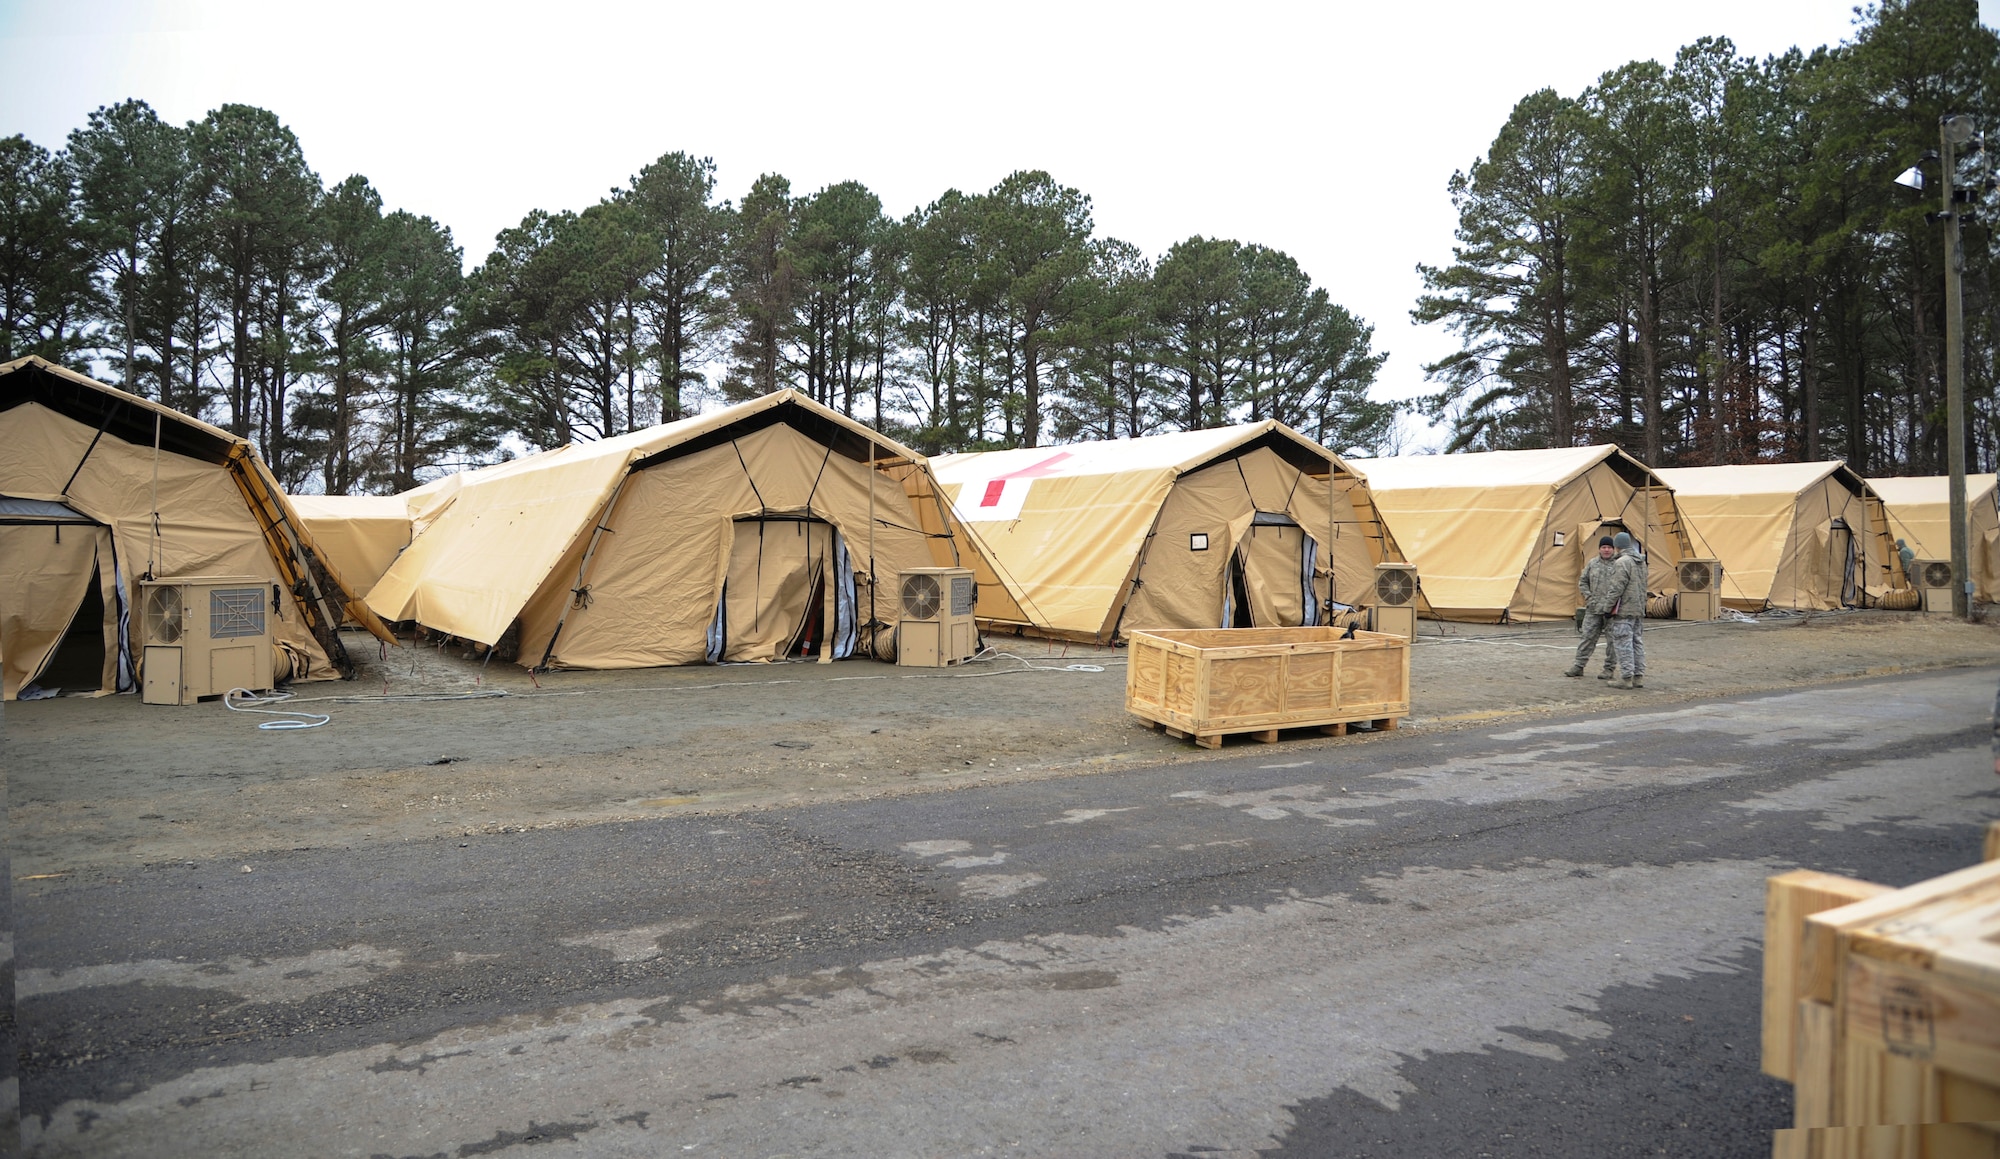 Recent equipment added to the Expeditionary Medical Support System is a new tent structure containing collective protection materials to protect against chemical, biological, radiological and nuclear attacks. The materials are incorporated into the outer skin of the structure, making it easier for the overall set up. (U.S. Air Force photo by Staff Sgt. Steve Stanley/Released)